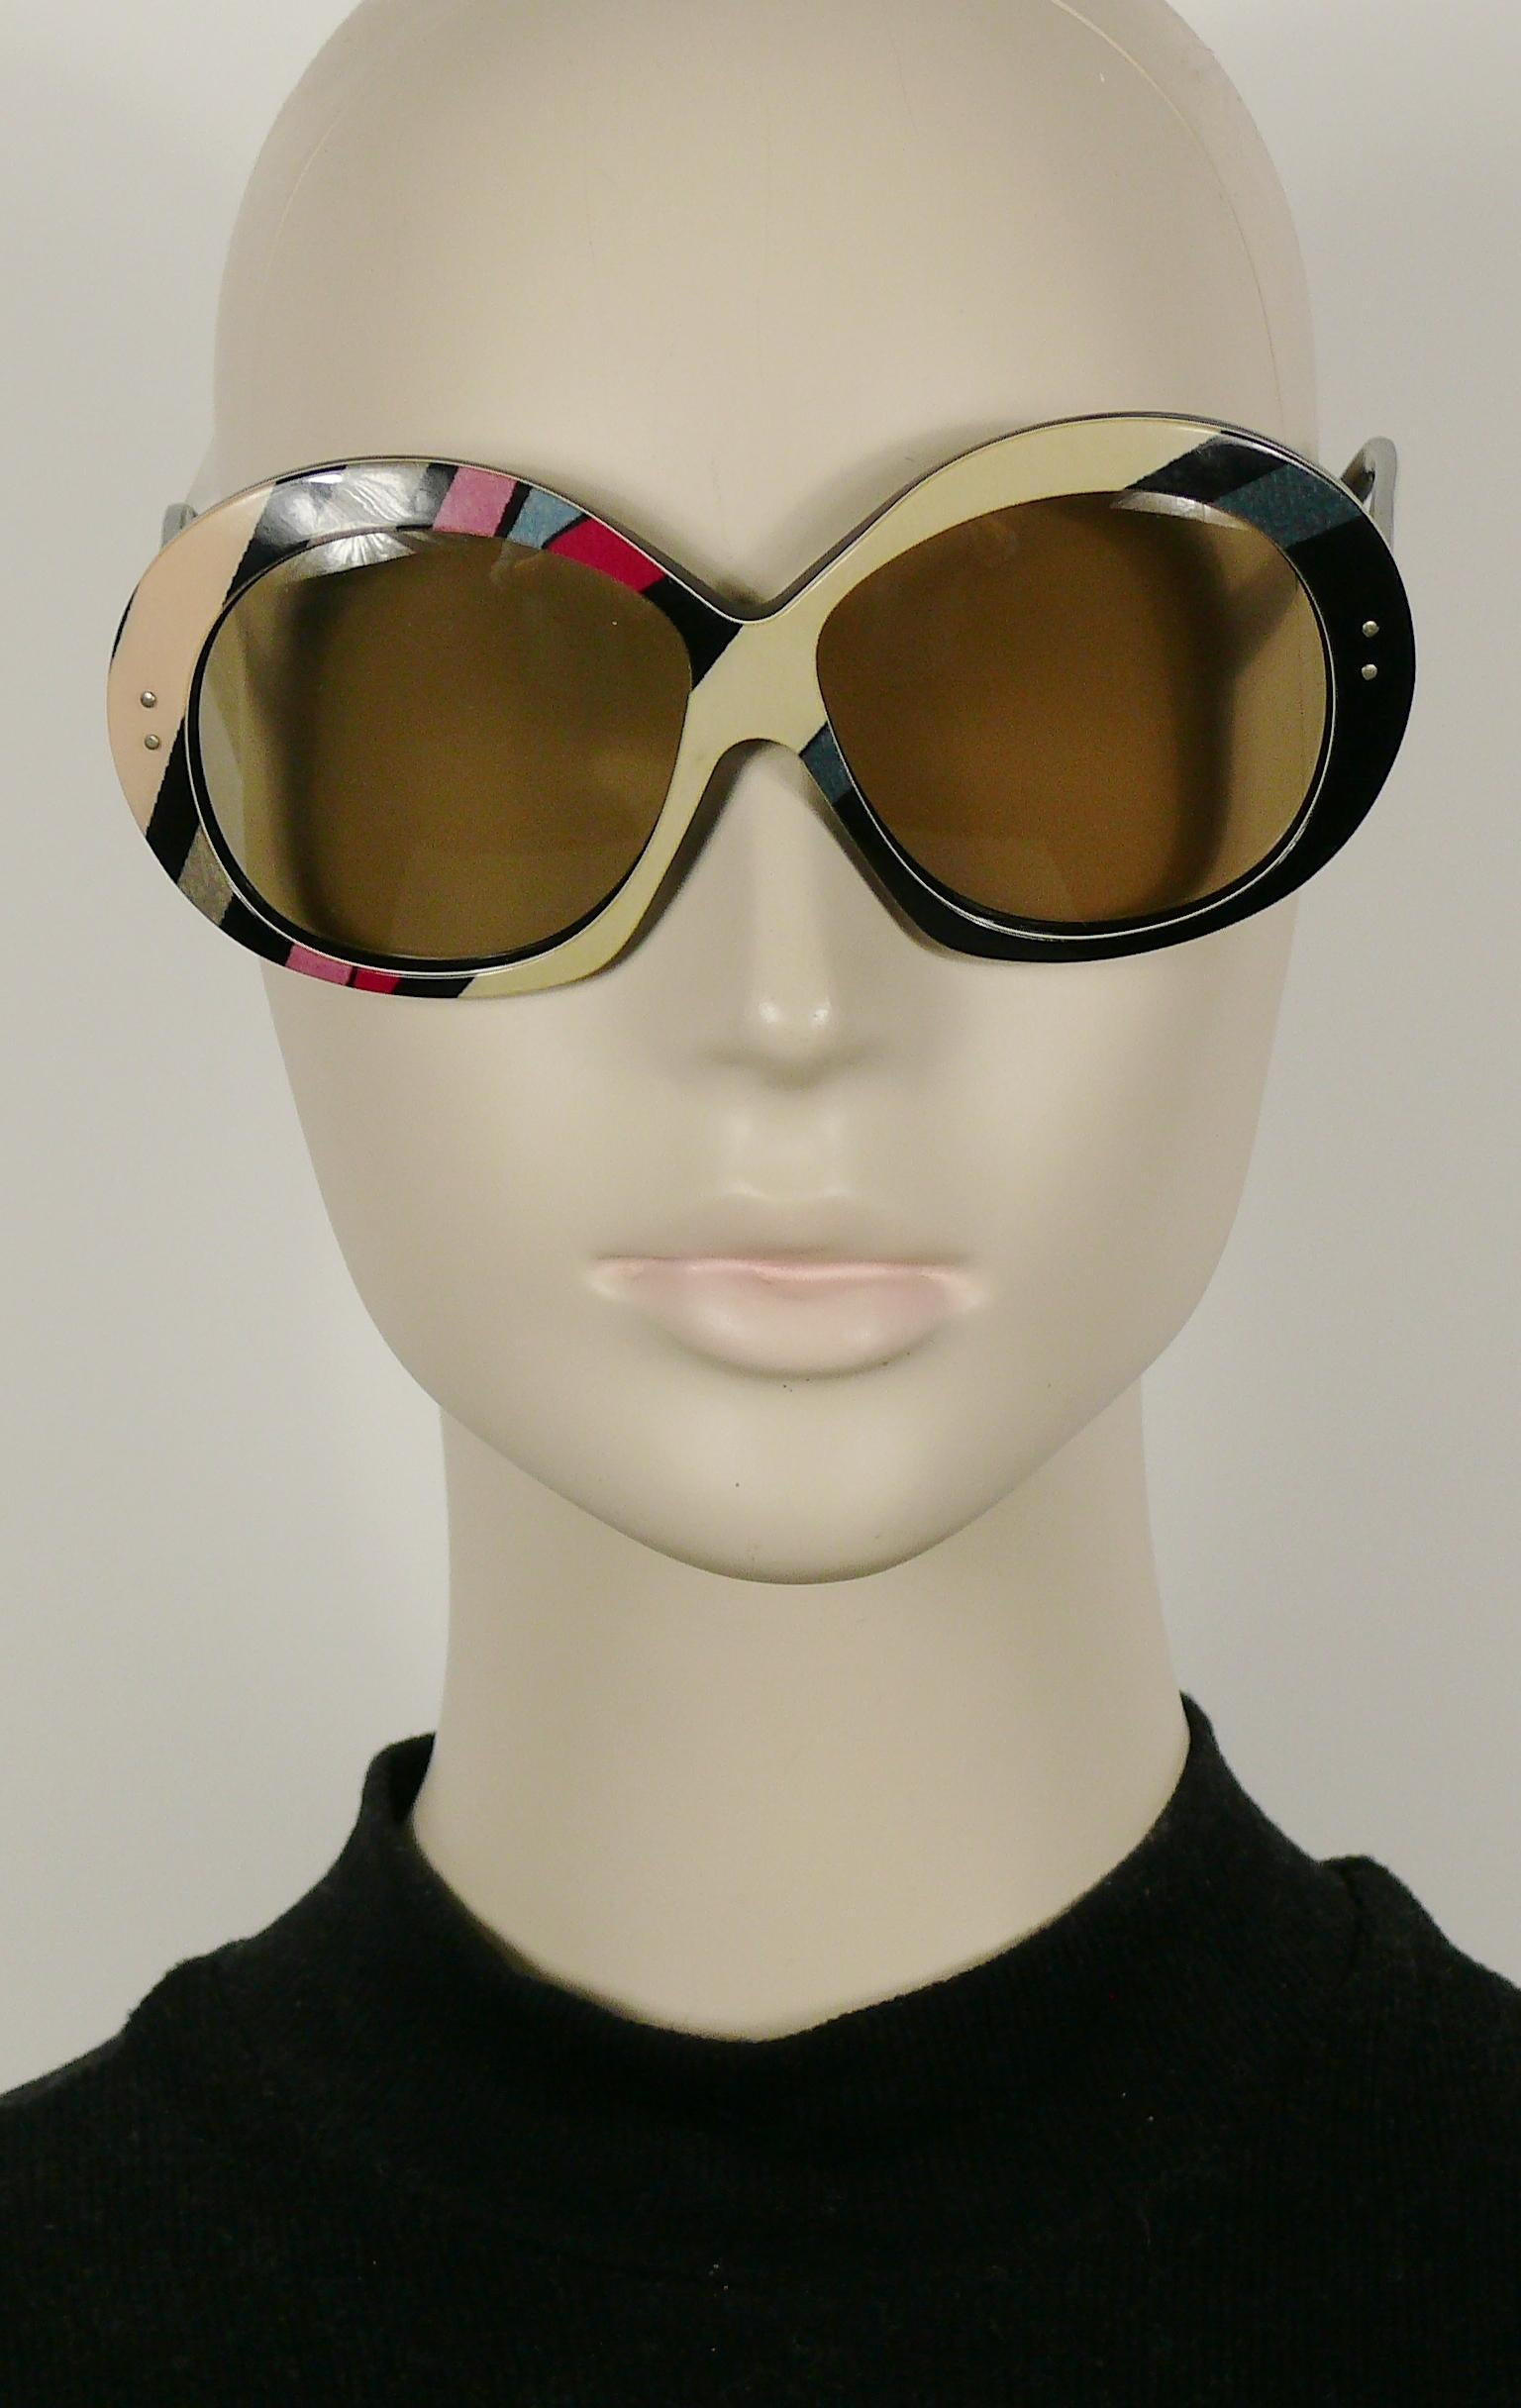 EMILIO PUCCI vintage oversized sunglasses featuring the iconic EMILIO PUCCI psychedelic print in shades of beige, grey, pink, purple and black.

A similar model was worn by ISABELLA ROSSELLINI for VOGUE ITALIA.

Original plastic tinted